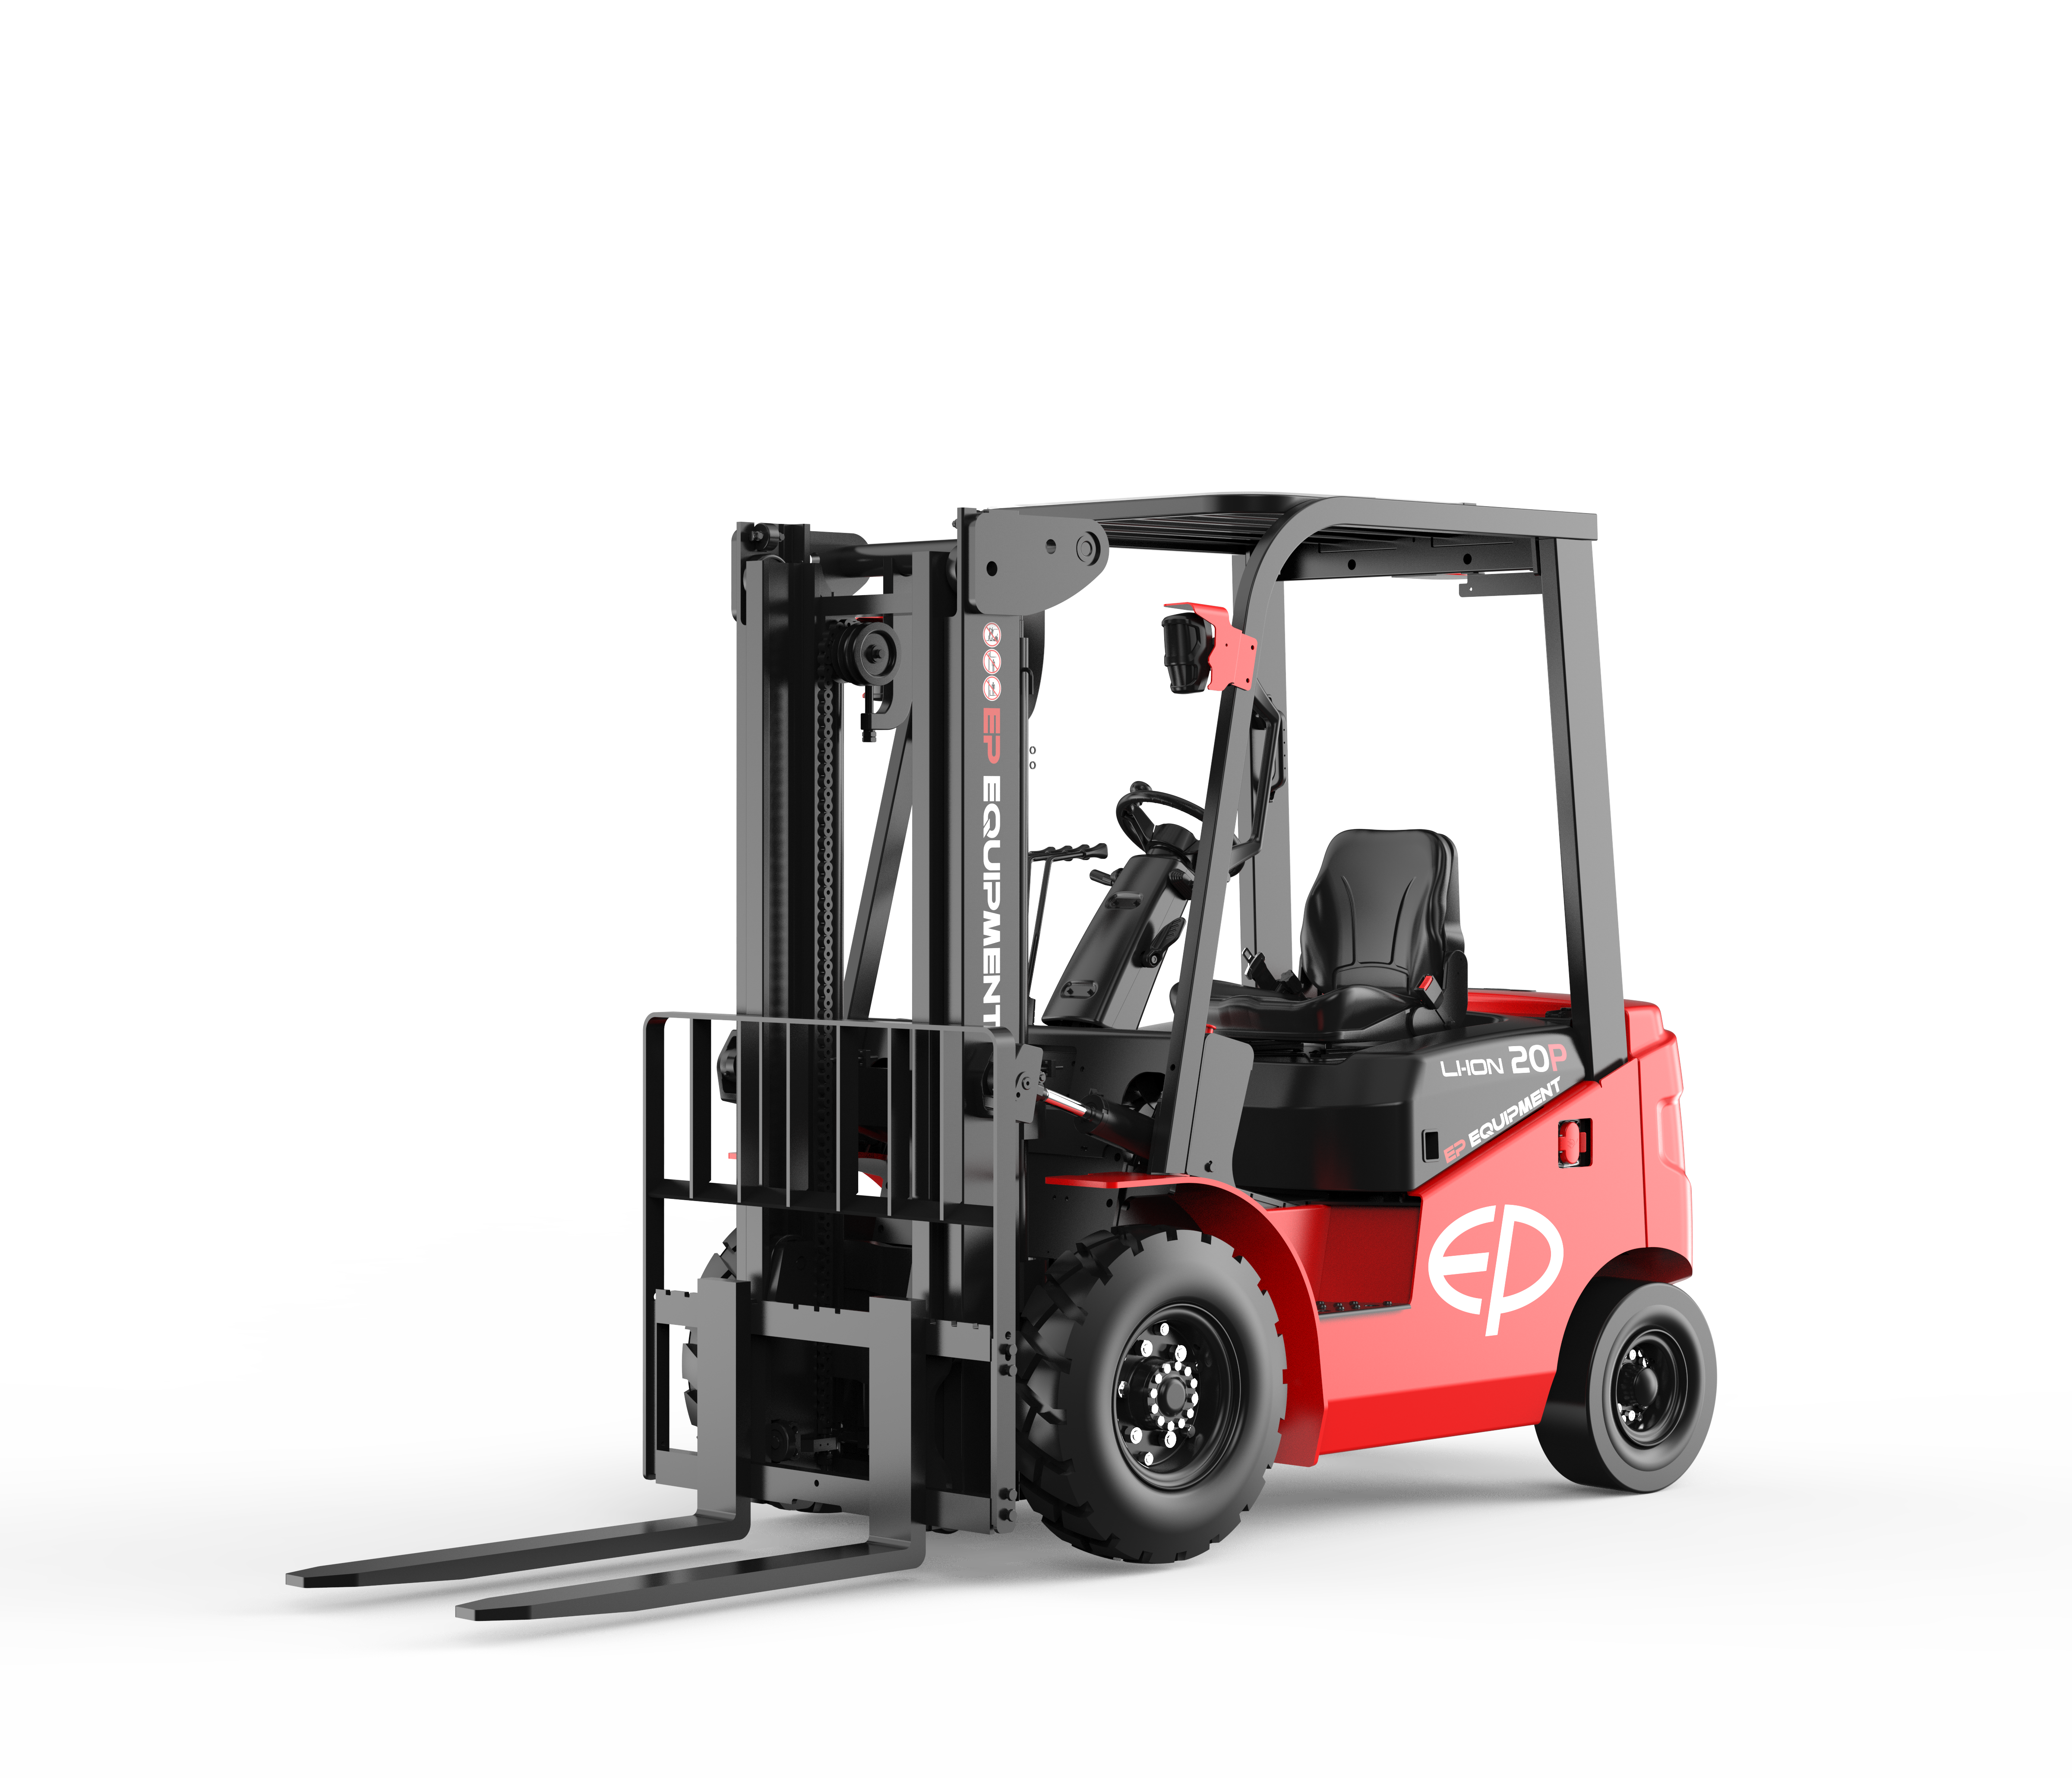 EFL series electric forklift in operation, going up a slope.